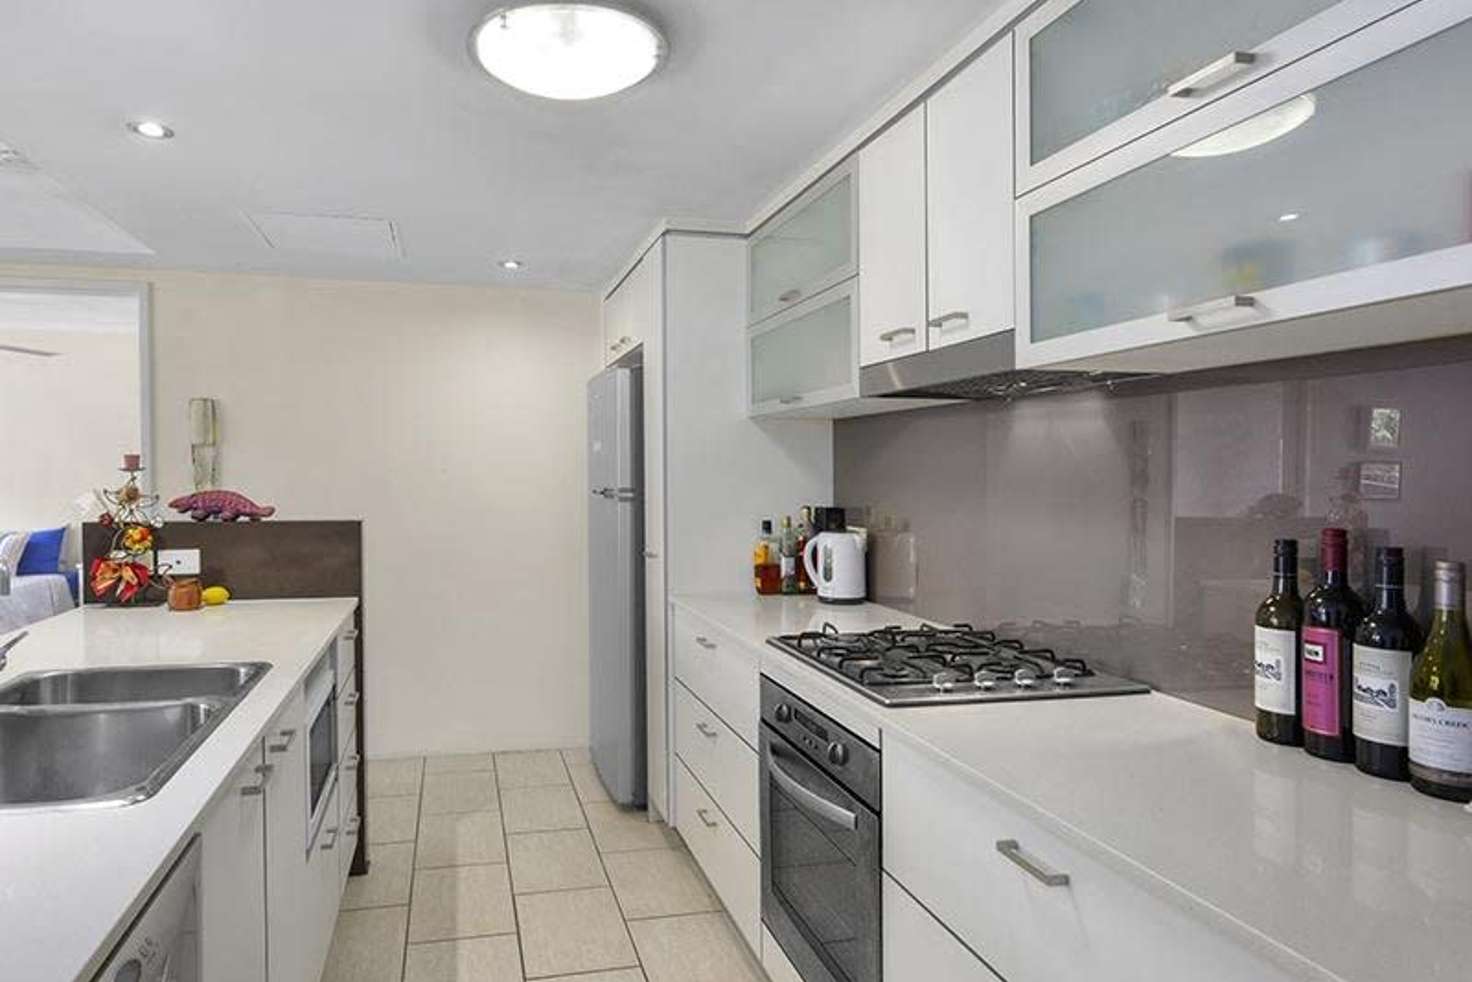 Main view of Homely apartment listing, 6 Exford Street, Brisbane QLD 4000